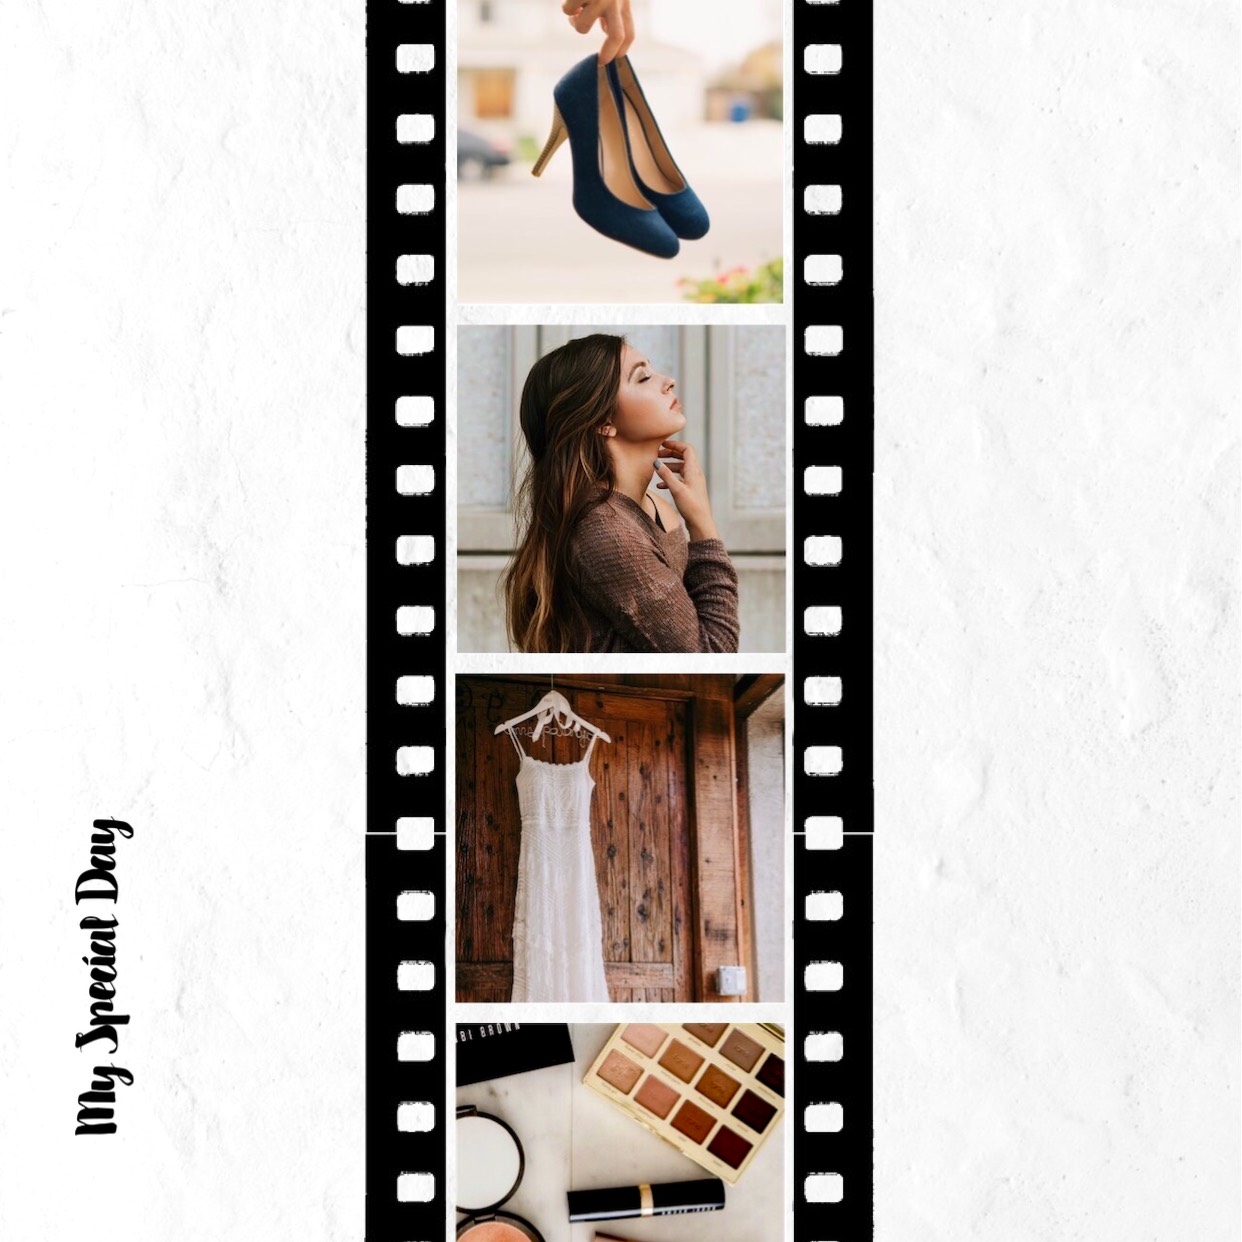 A Film Strip With A Picture Of A Woman In High Heels Facebook Post Template